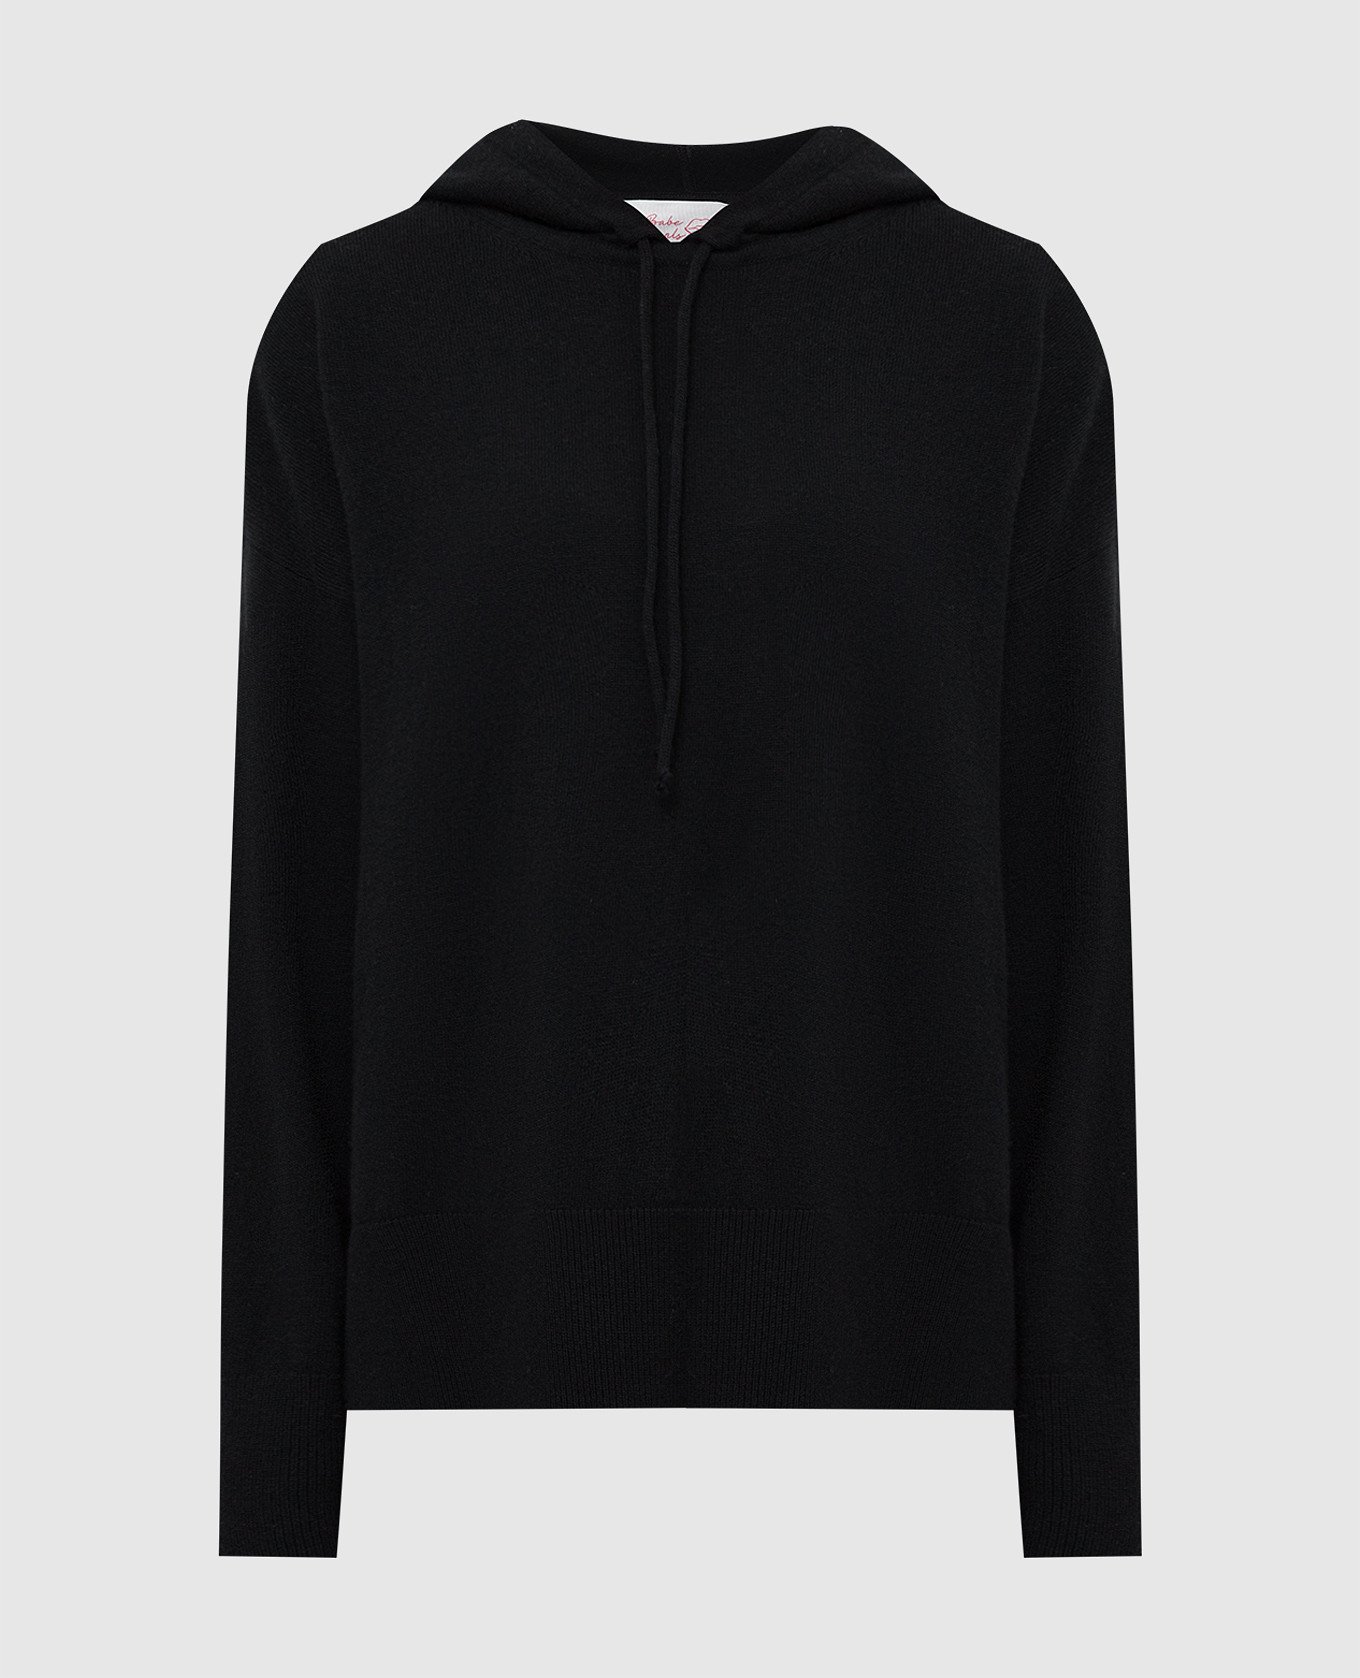 Black wool and cashmere hooded jumper